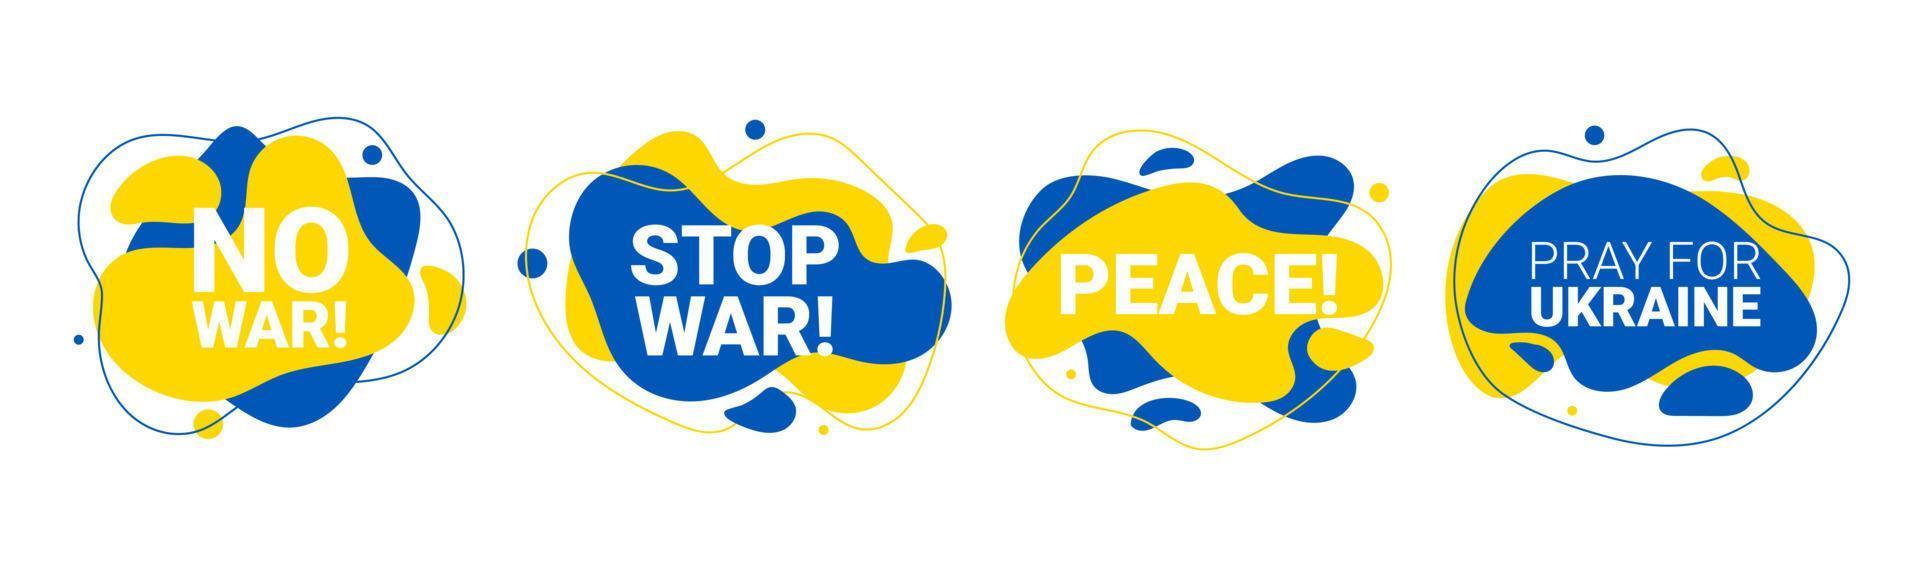 Vector liquid and fluid background illustration of No War, stop war, peace, pray for ukraine concept with prohibition sign on Ukraine flag. No war and military attack in Ukraine poster.